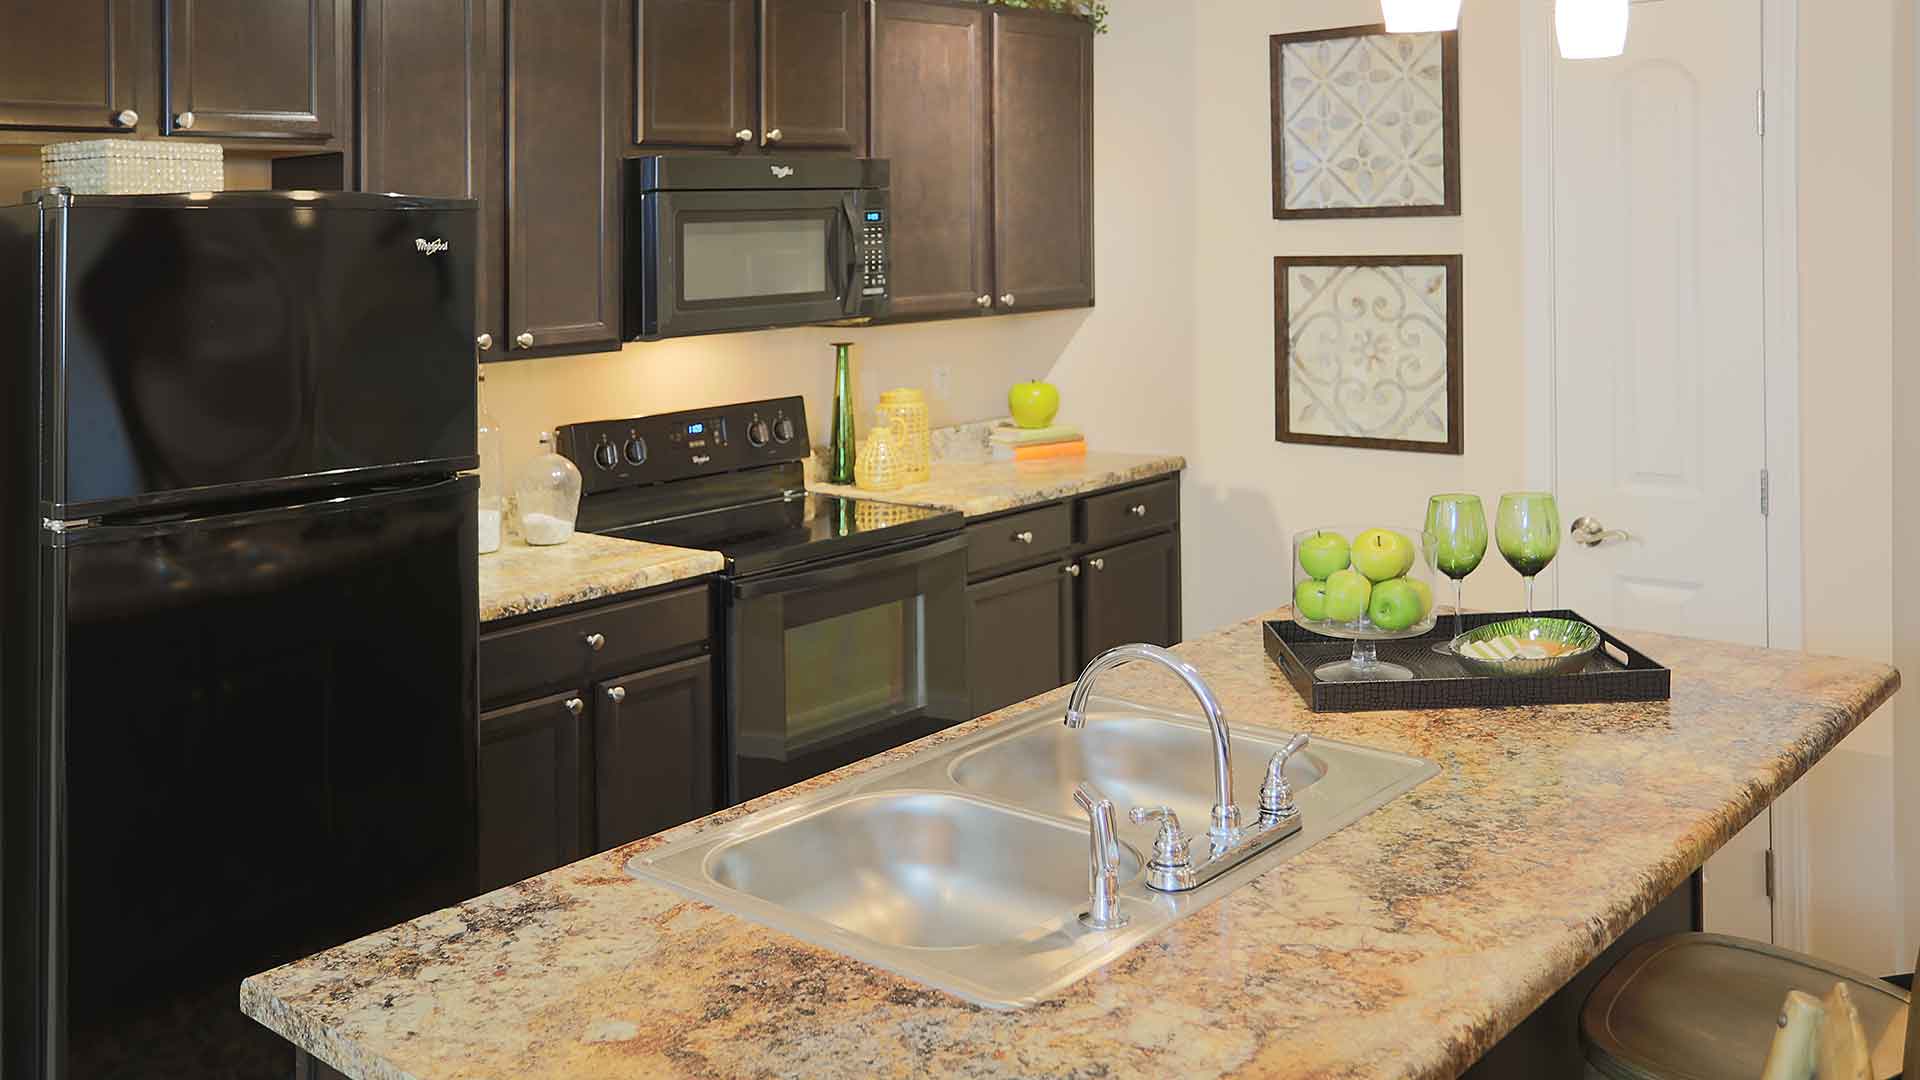 Apartment kitchen with an island and updated appliances at Brinley Place.